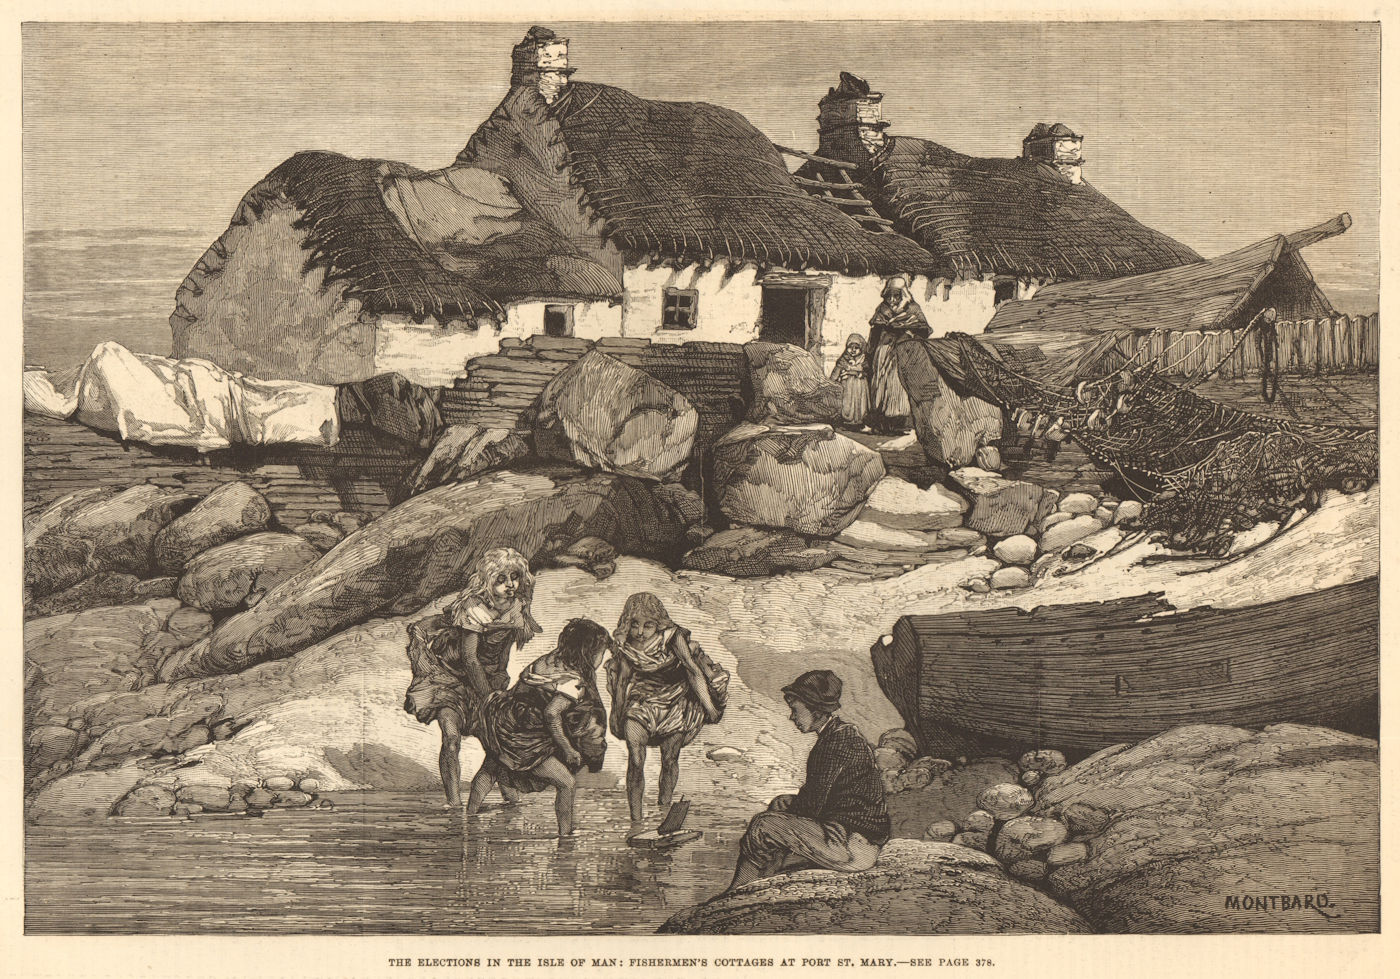 The Isle of Man election: fishermen's cottages at Port St. Mary 1881 old print